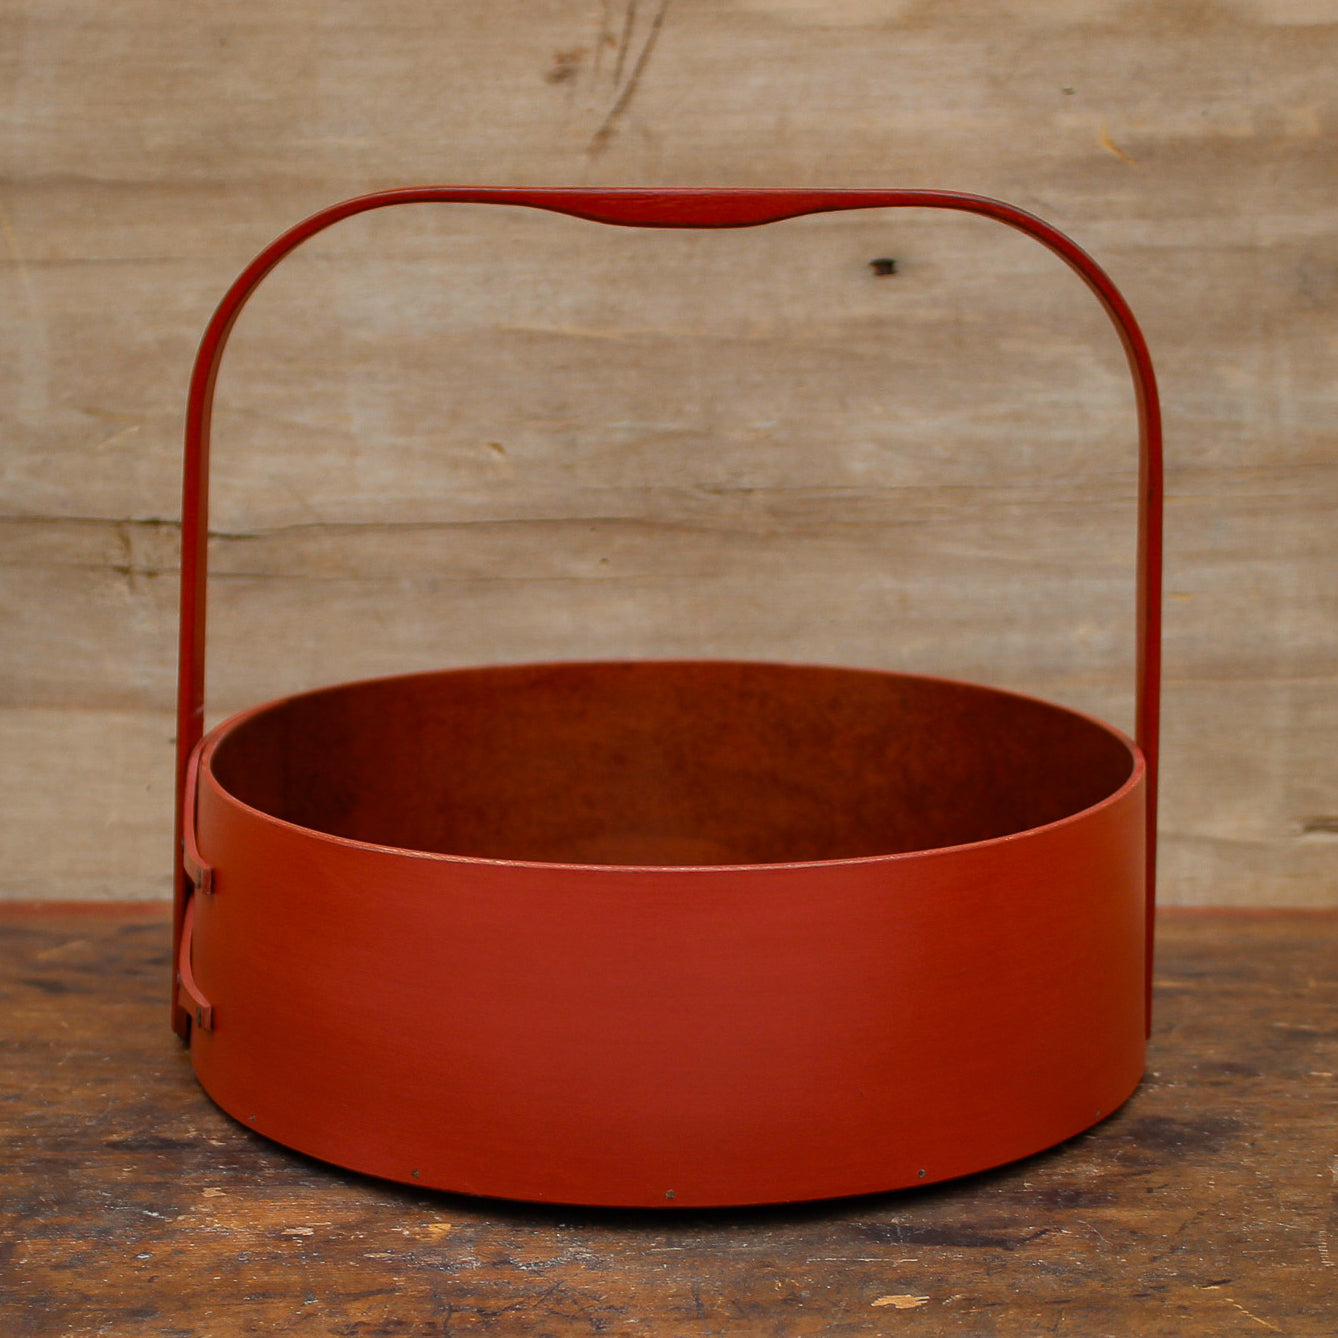 Large Shaker Style Sewing Carrier, LeHays Shaker Boxes, Handcrafted in Maine, Red Milk Paint Finish, Handle View